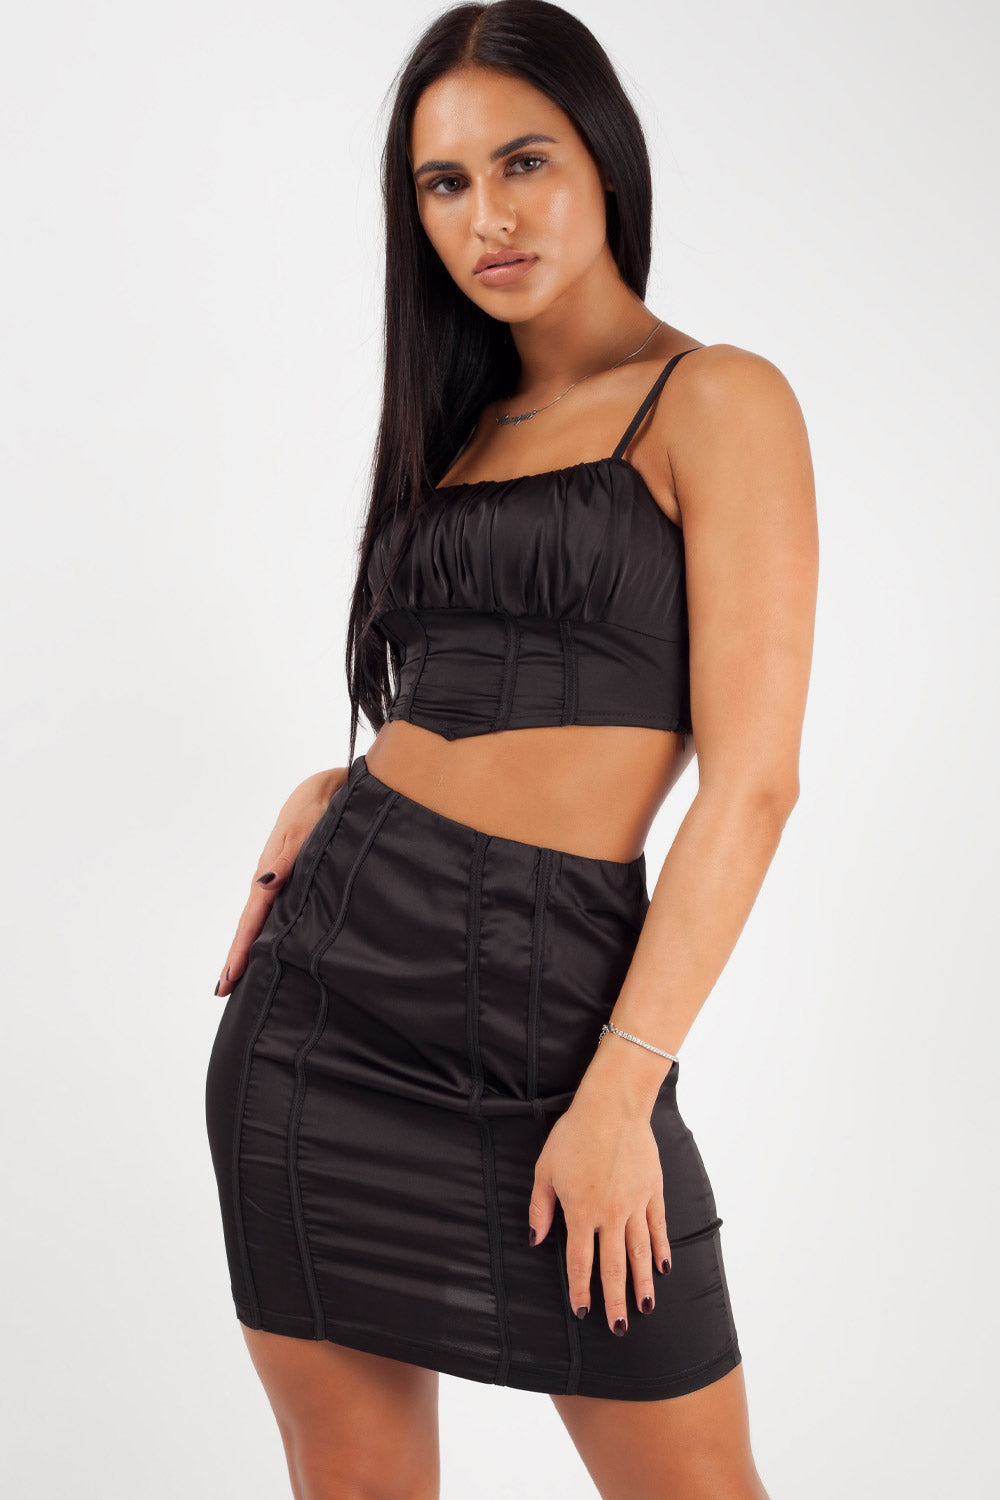 Black Satin Crop Top Mini Skirt Co-Ord Set Party Outfit – 